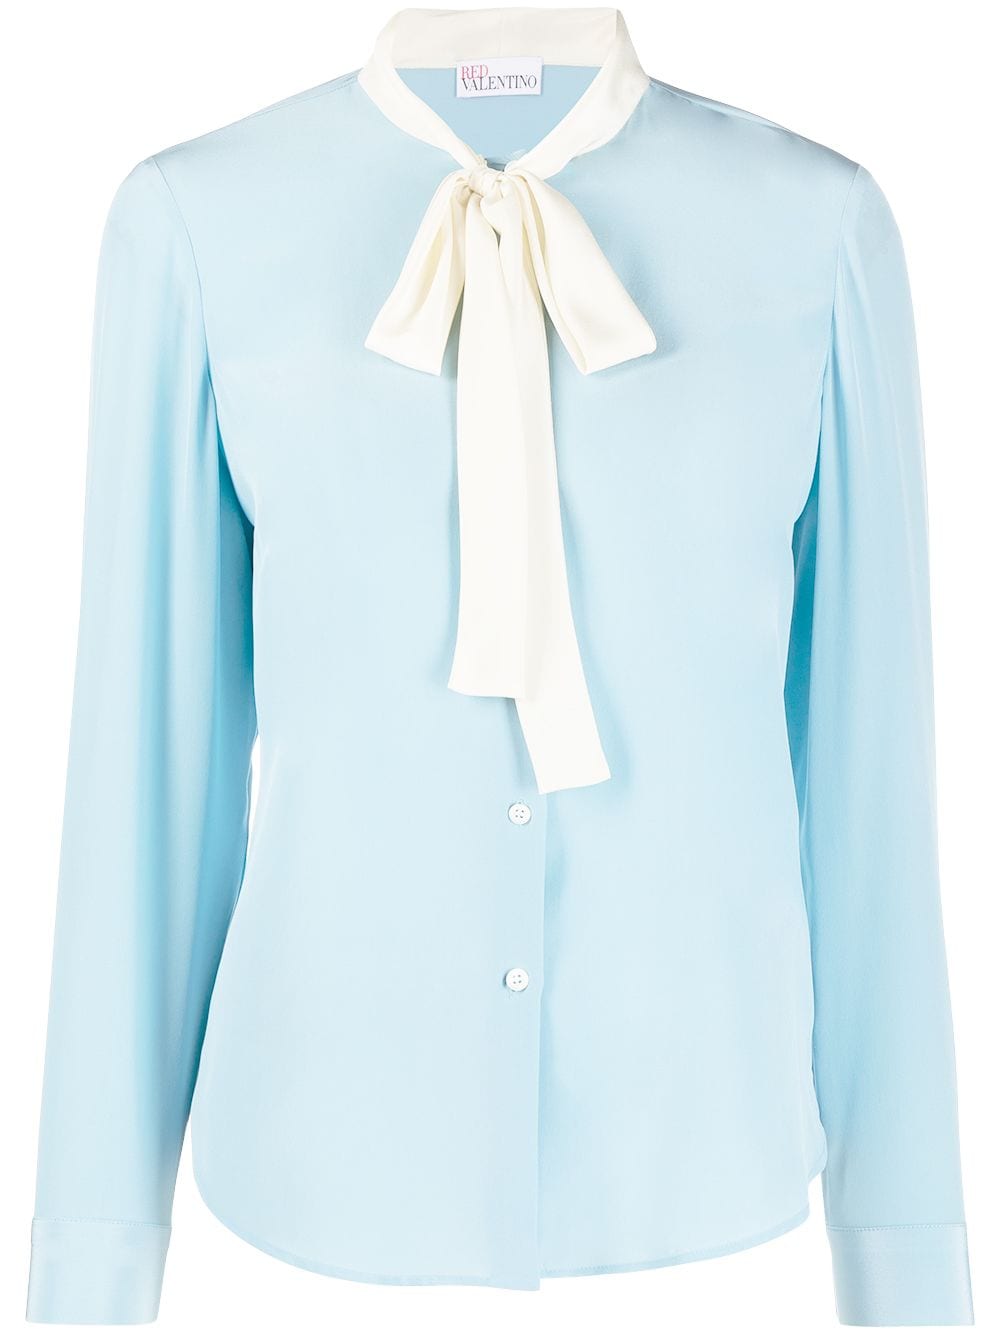 Shop RED Valentino pussy-bow blouse with Express Delivery - FARFETCH